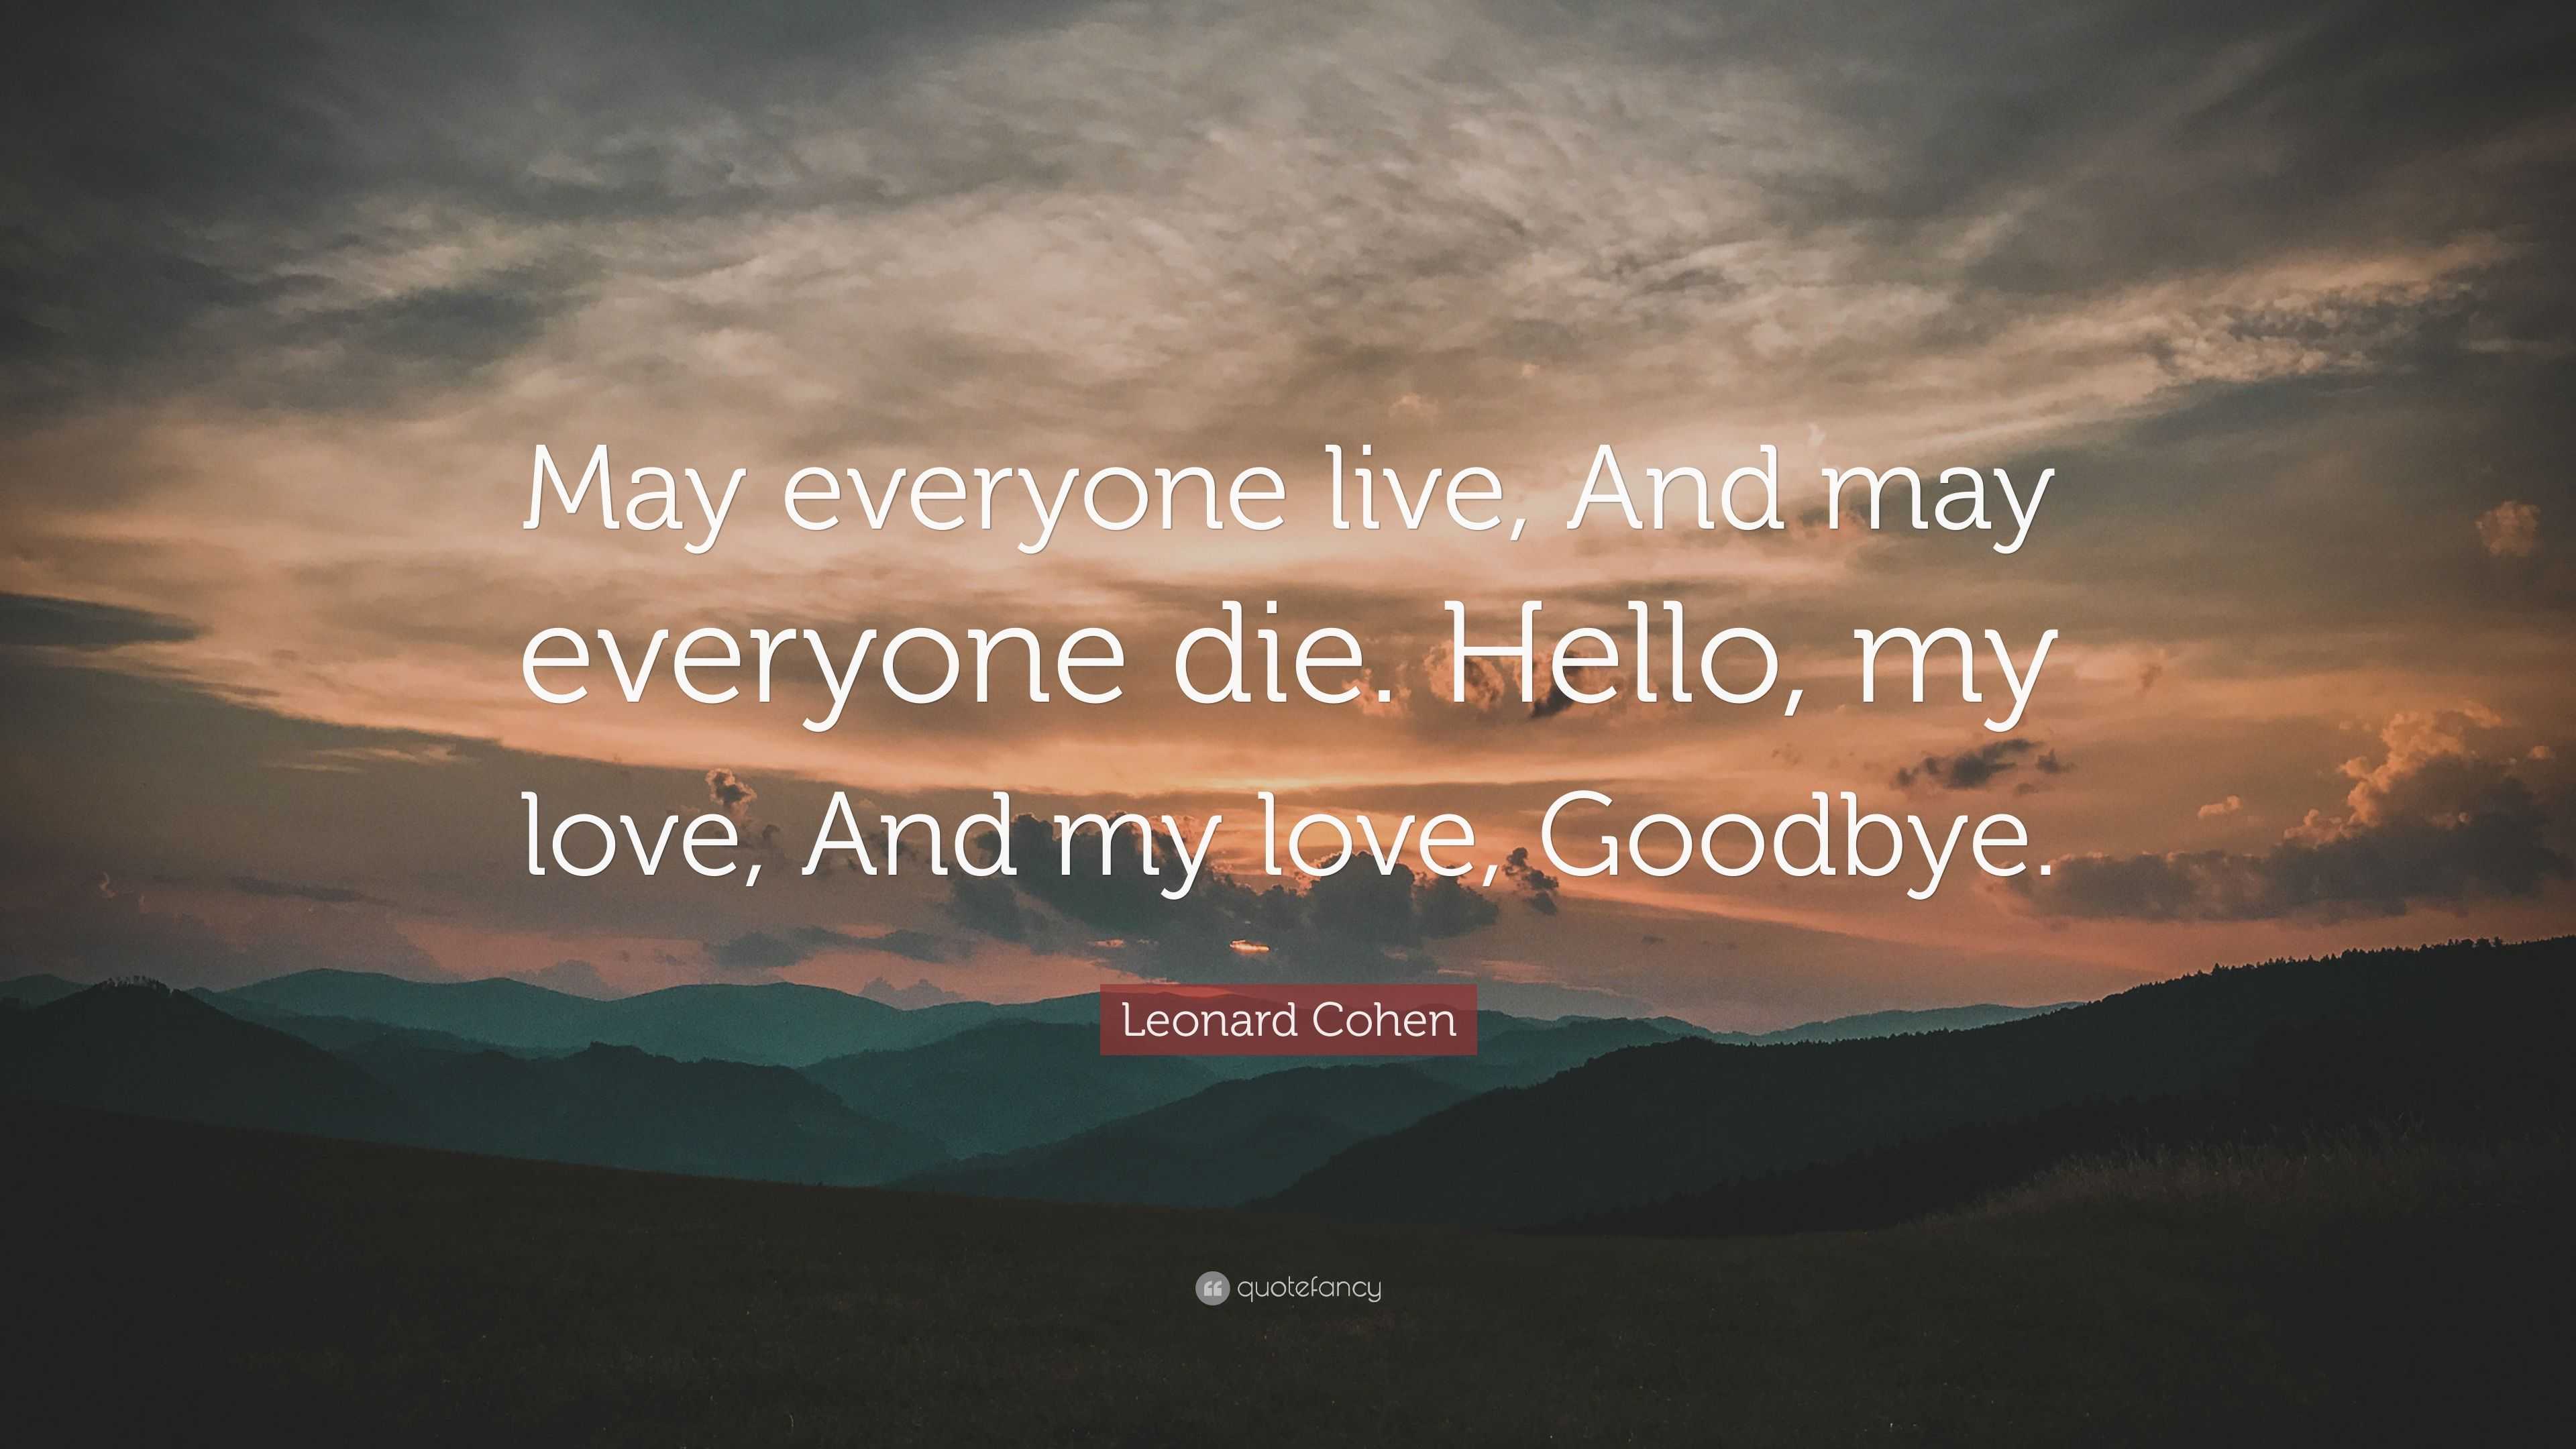 Leonard Cohen Quote: “May everyone live, And may everyone die. Hello